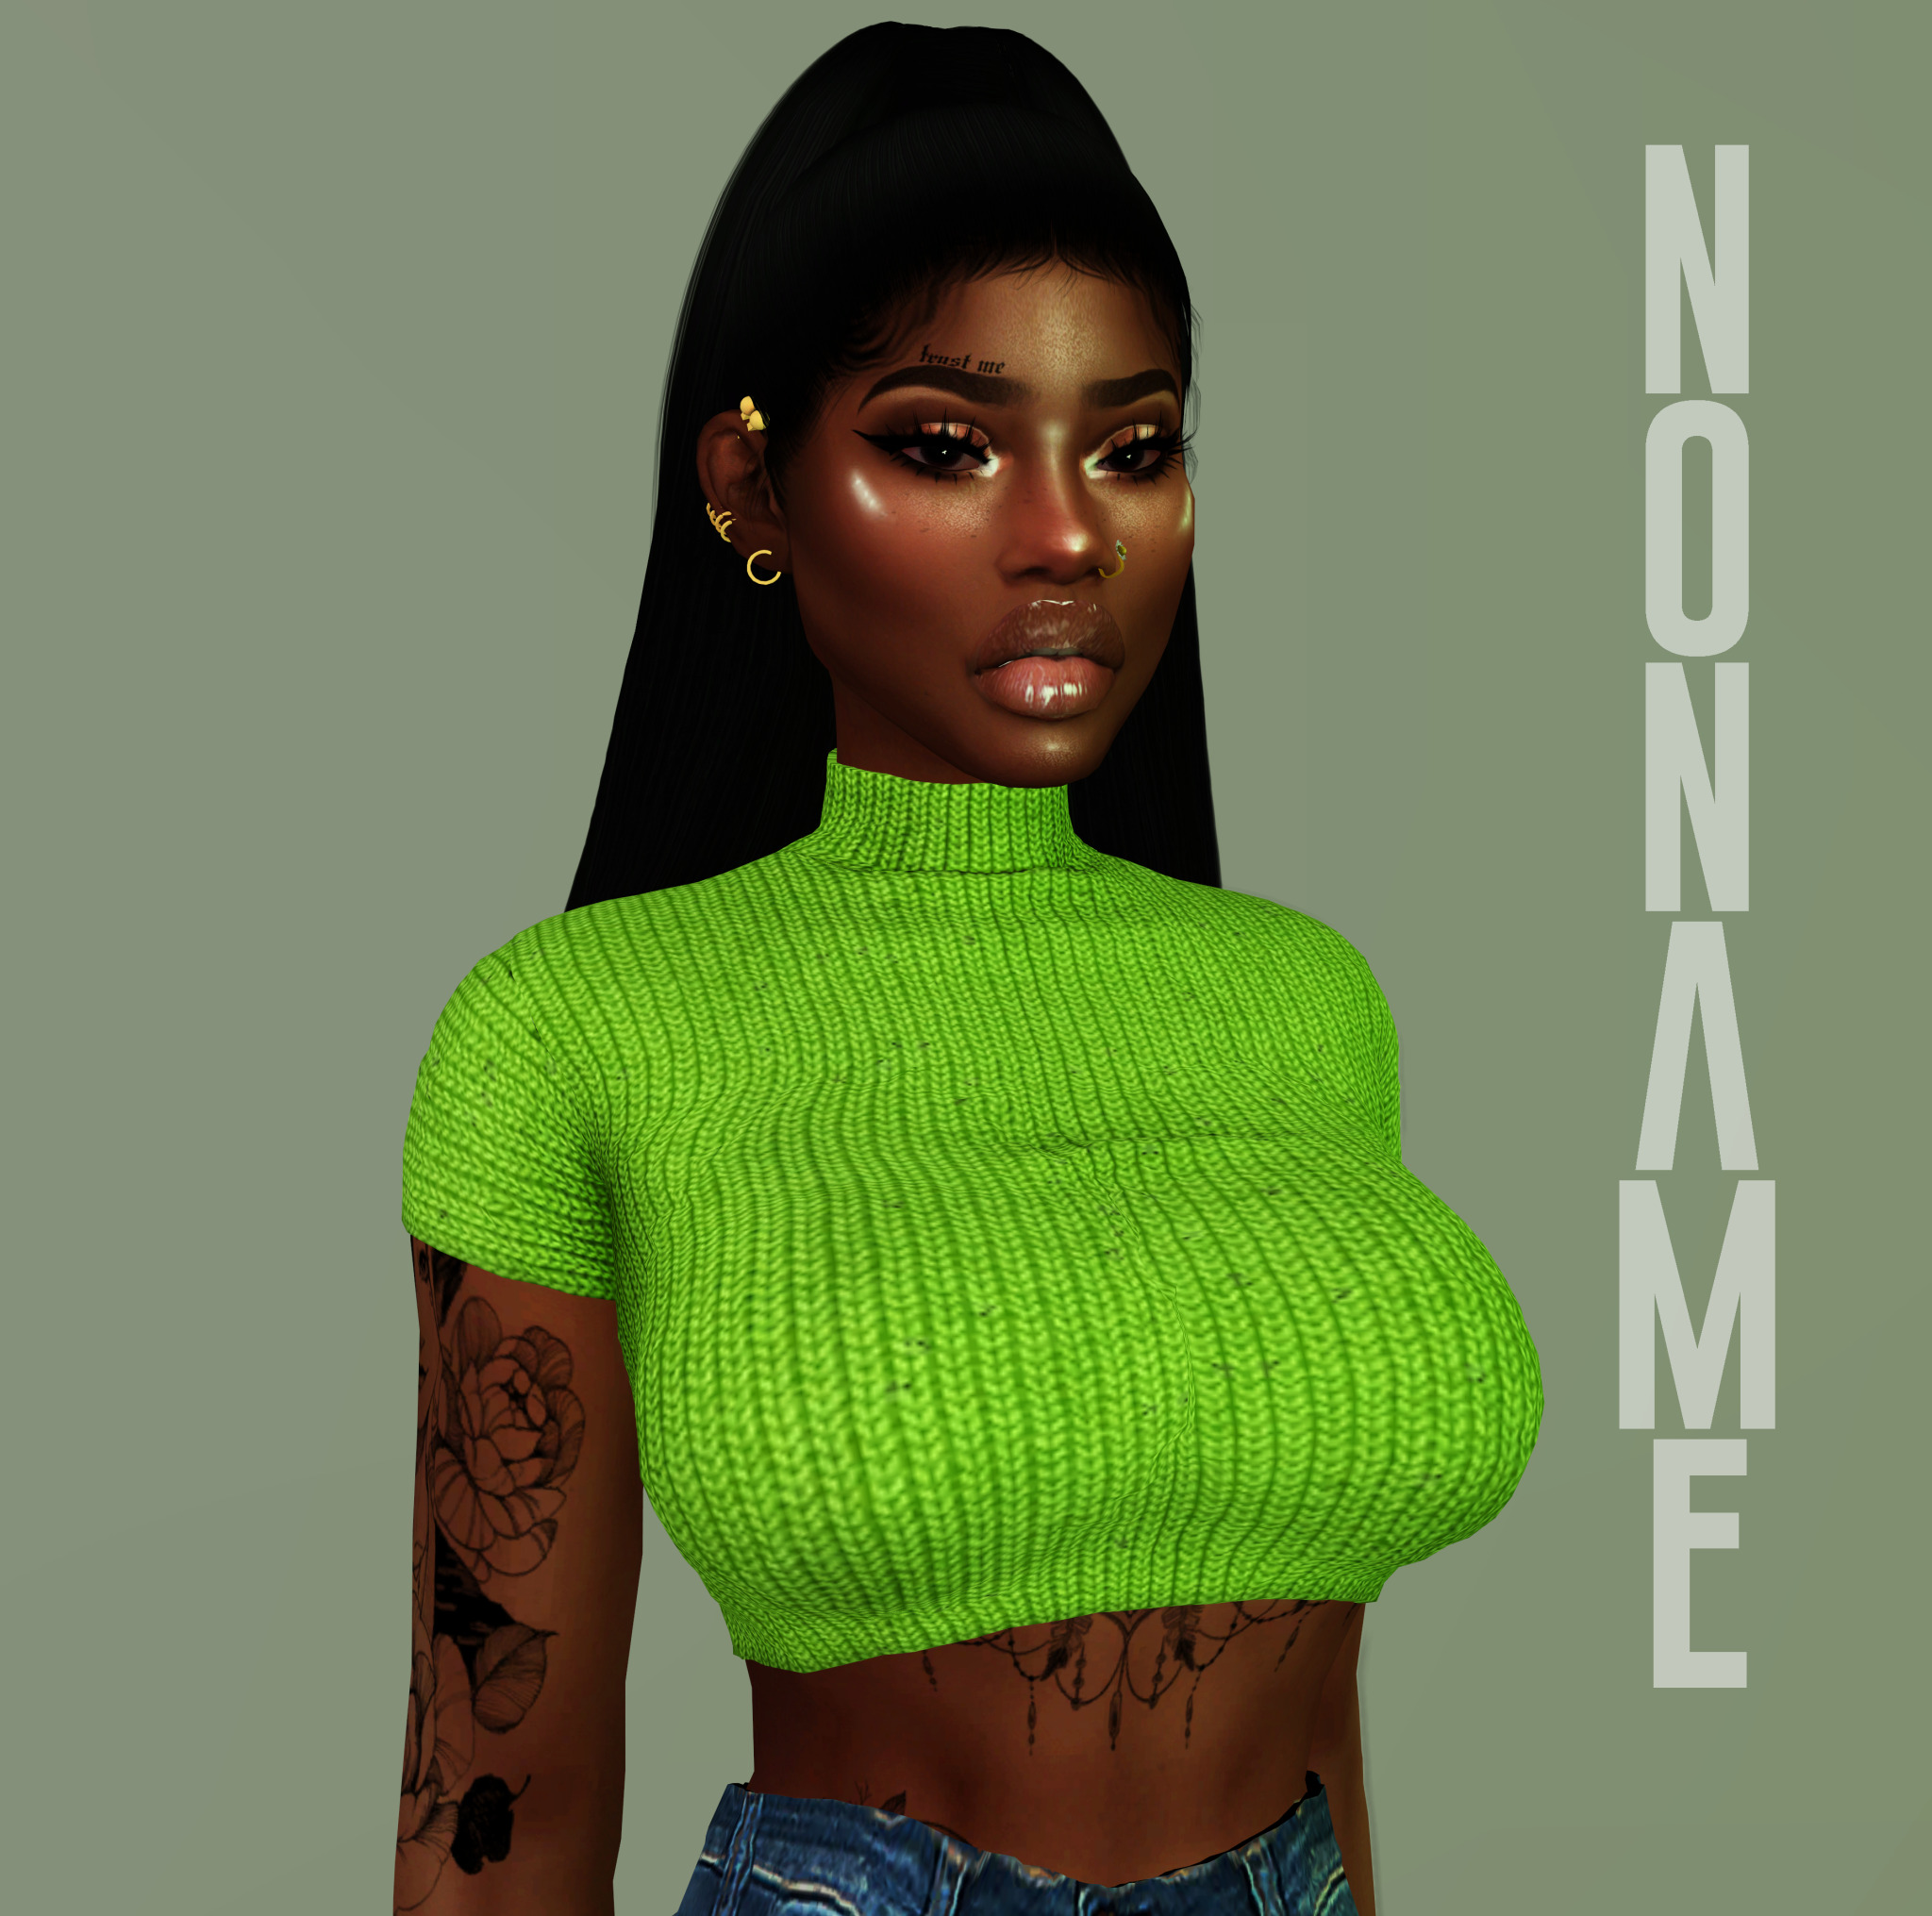 Proud Black Simmer in 2021 | The sims 4 pc, Sims 4 cc 